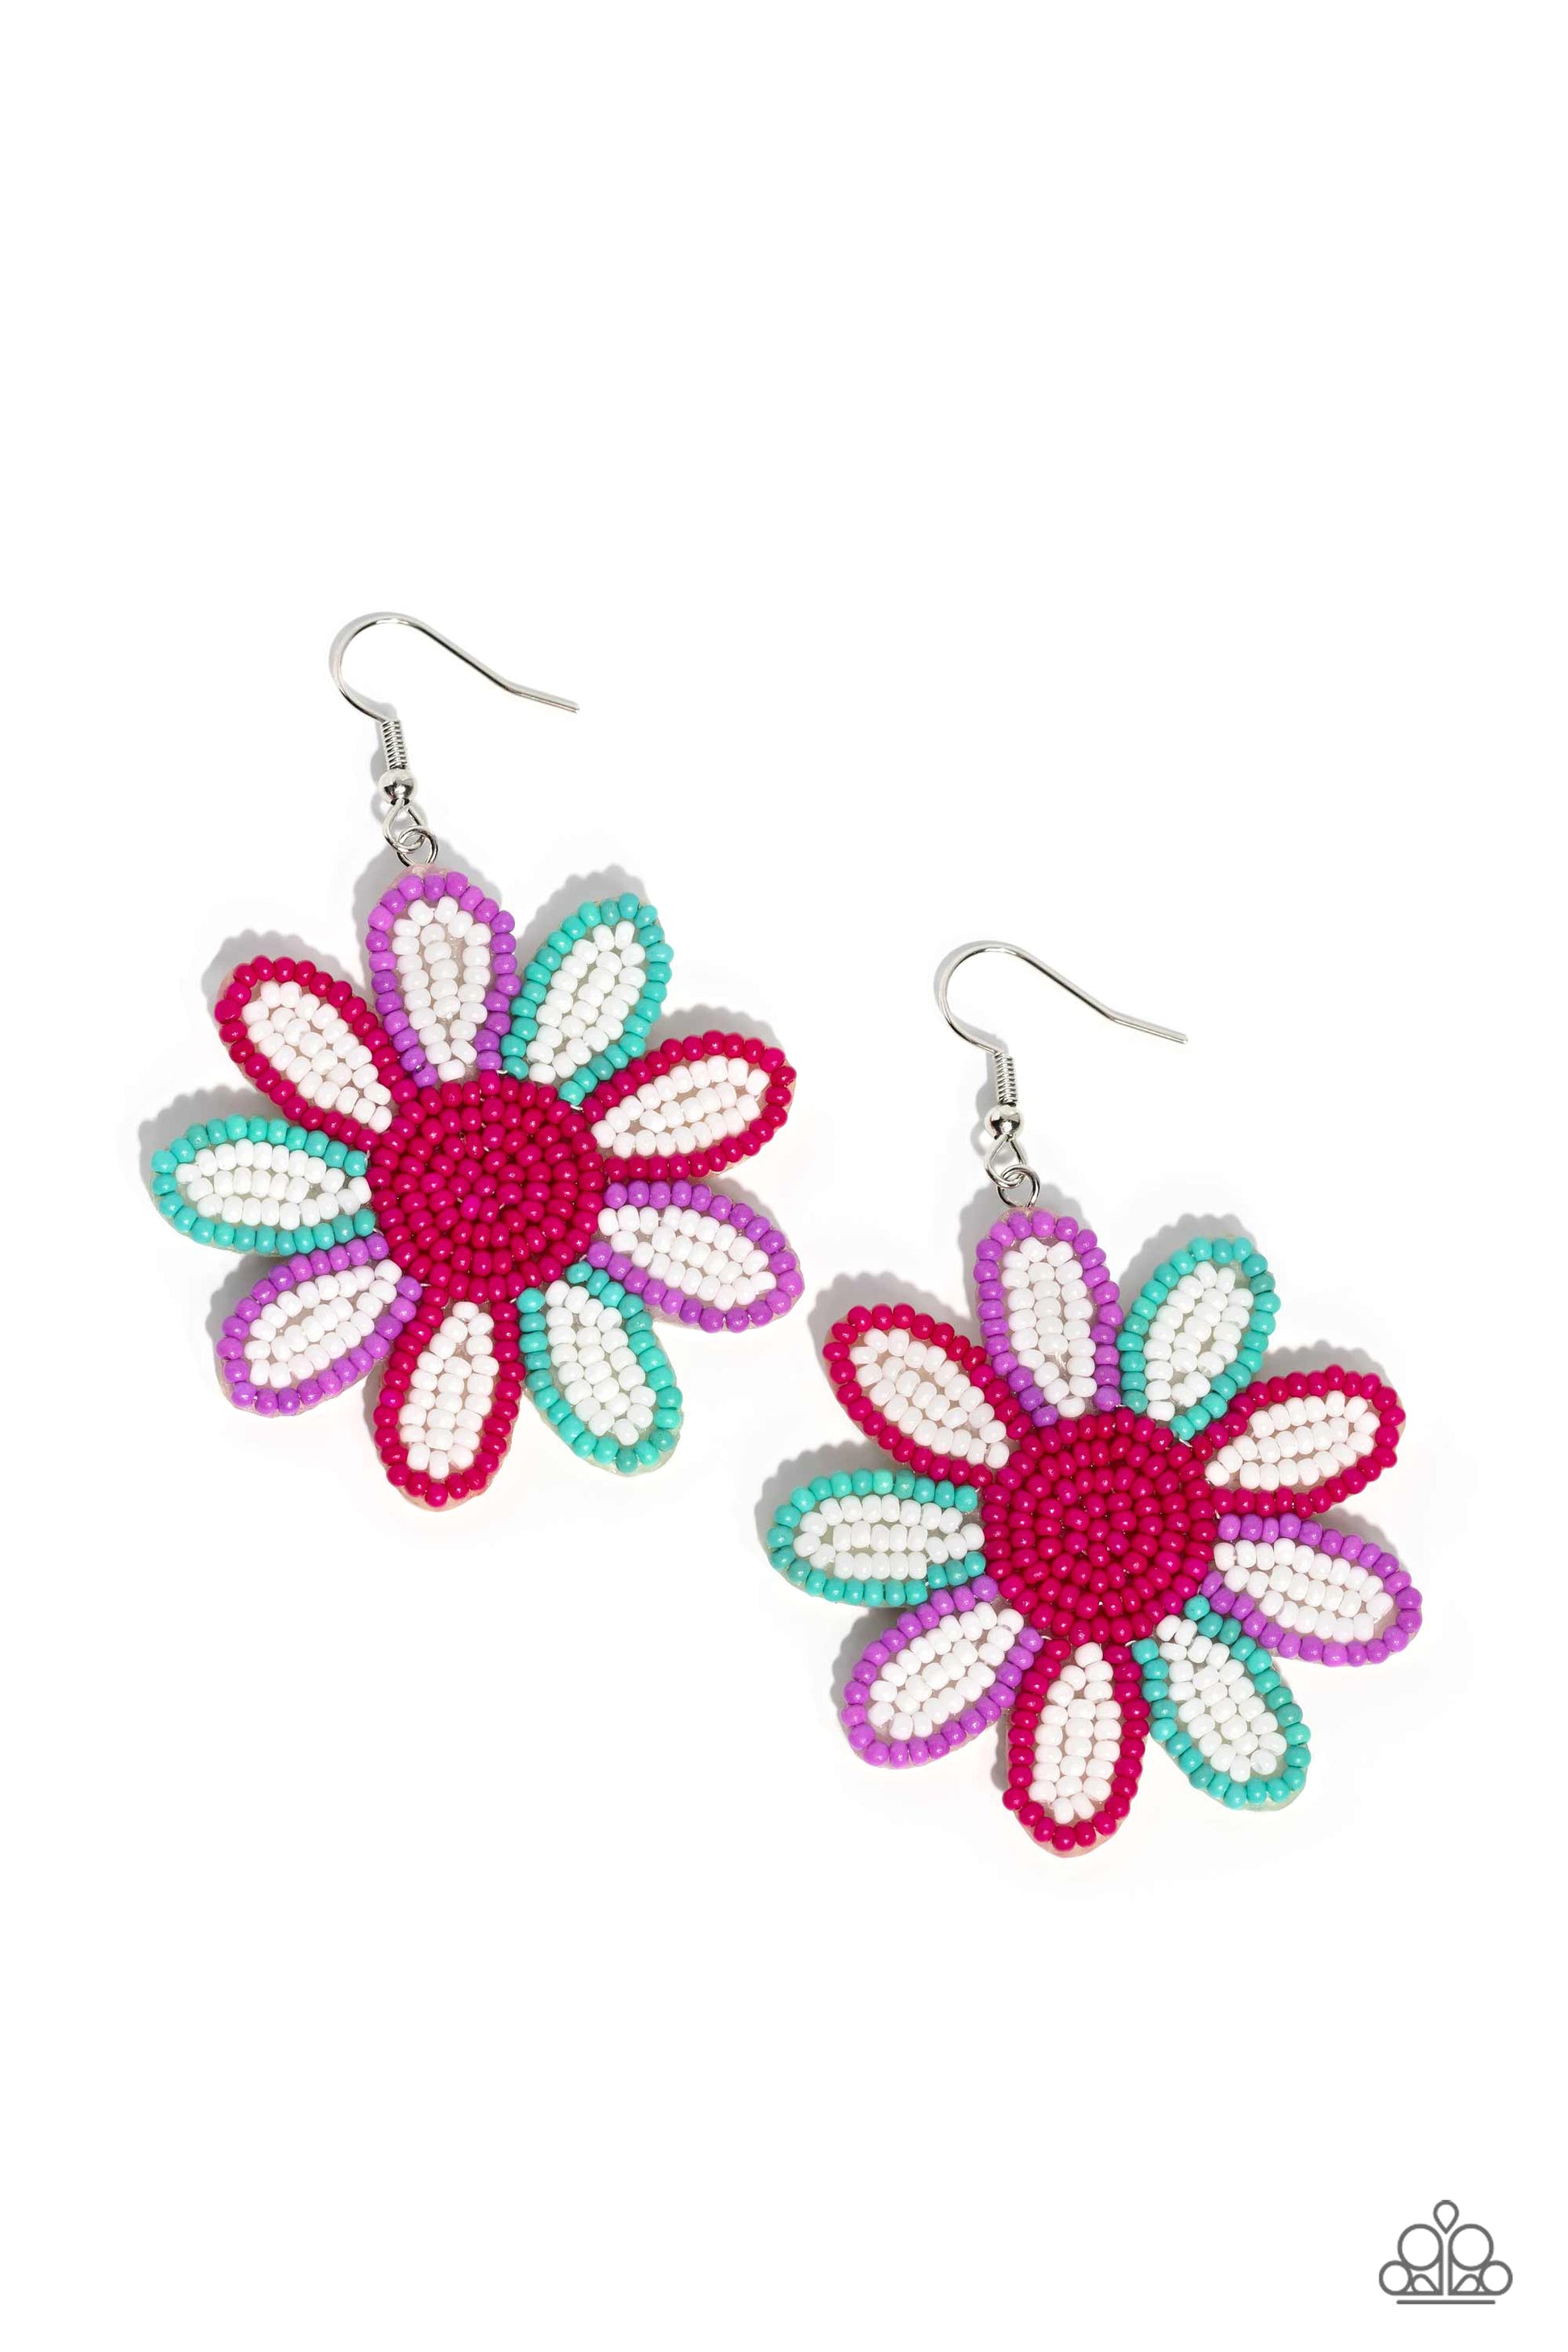 Decorated Daisies White Flower Earring - Paparazzi Accessories Item #P5ST-WTXX-069XX Layers of white seed bead petals, encased in seed bead frames of hot pink, tiffany, and lavender fan out from a hot pink seed bead center, blooming into a textured floral lure. Earring attaches to a standard fishhook fitting.  Featured inside The Preview at Made for More!  Sold as one pair of earrings.